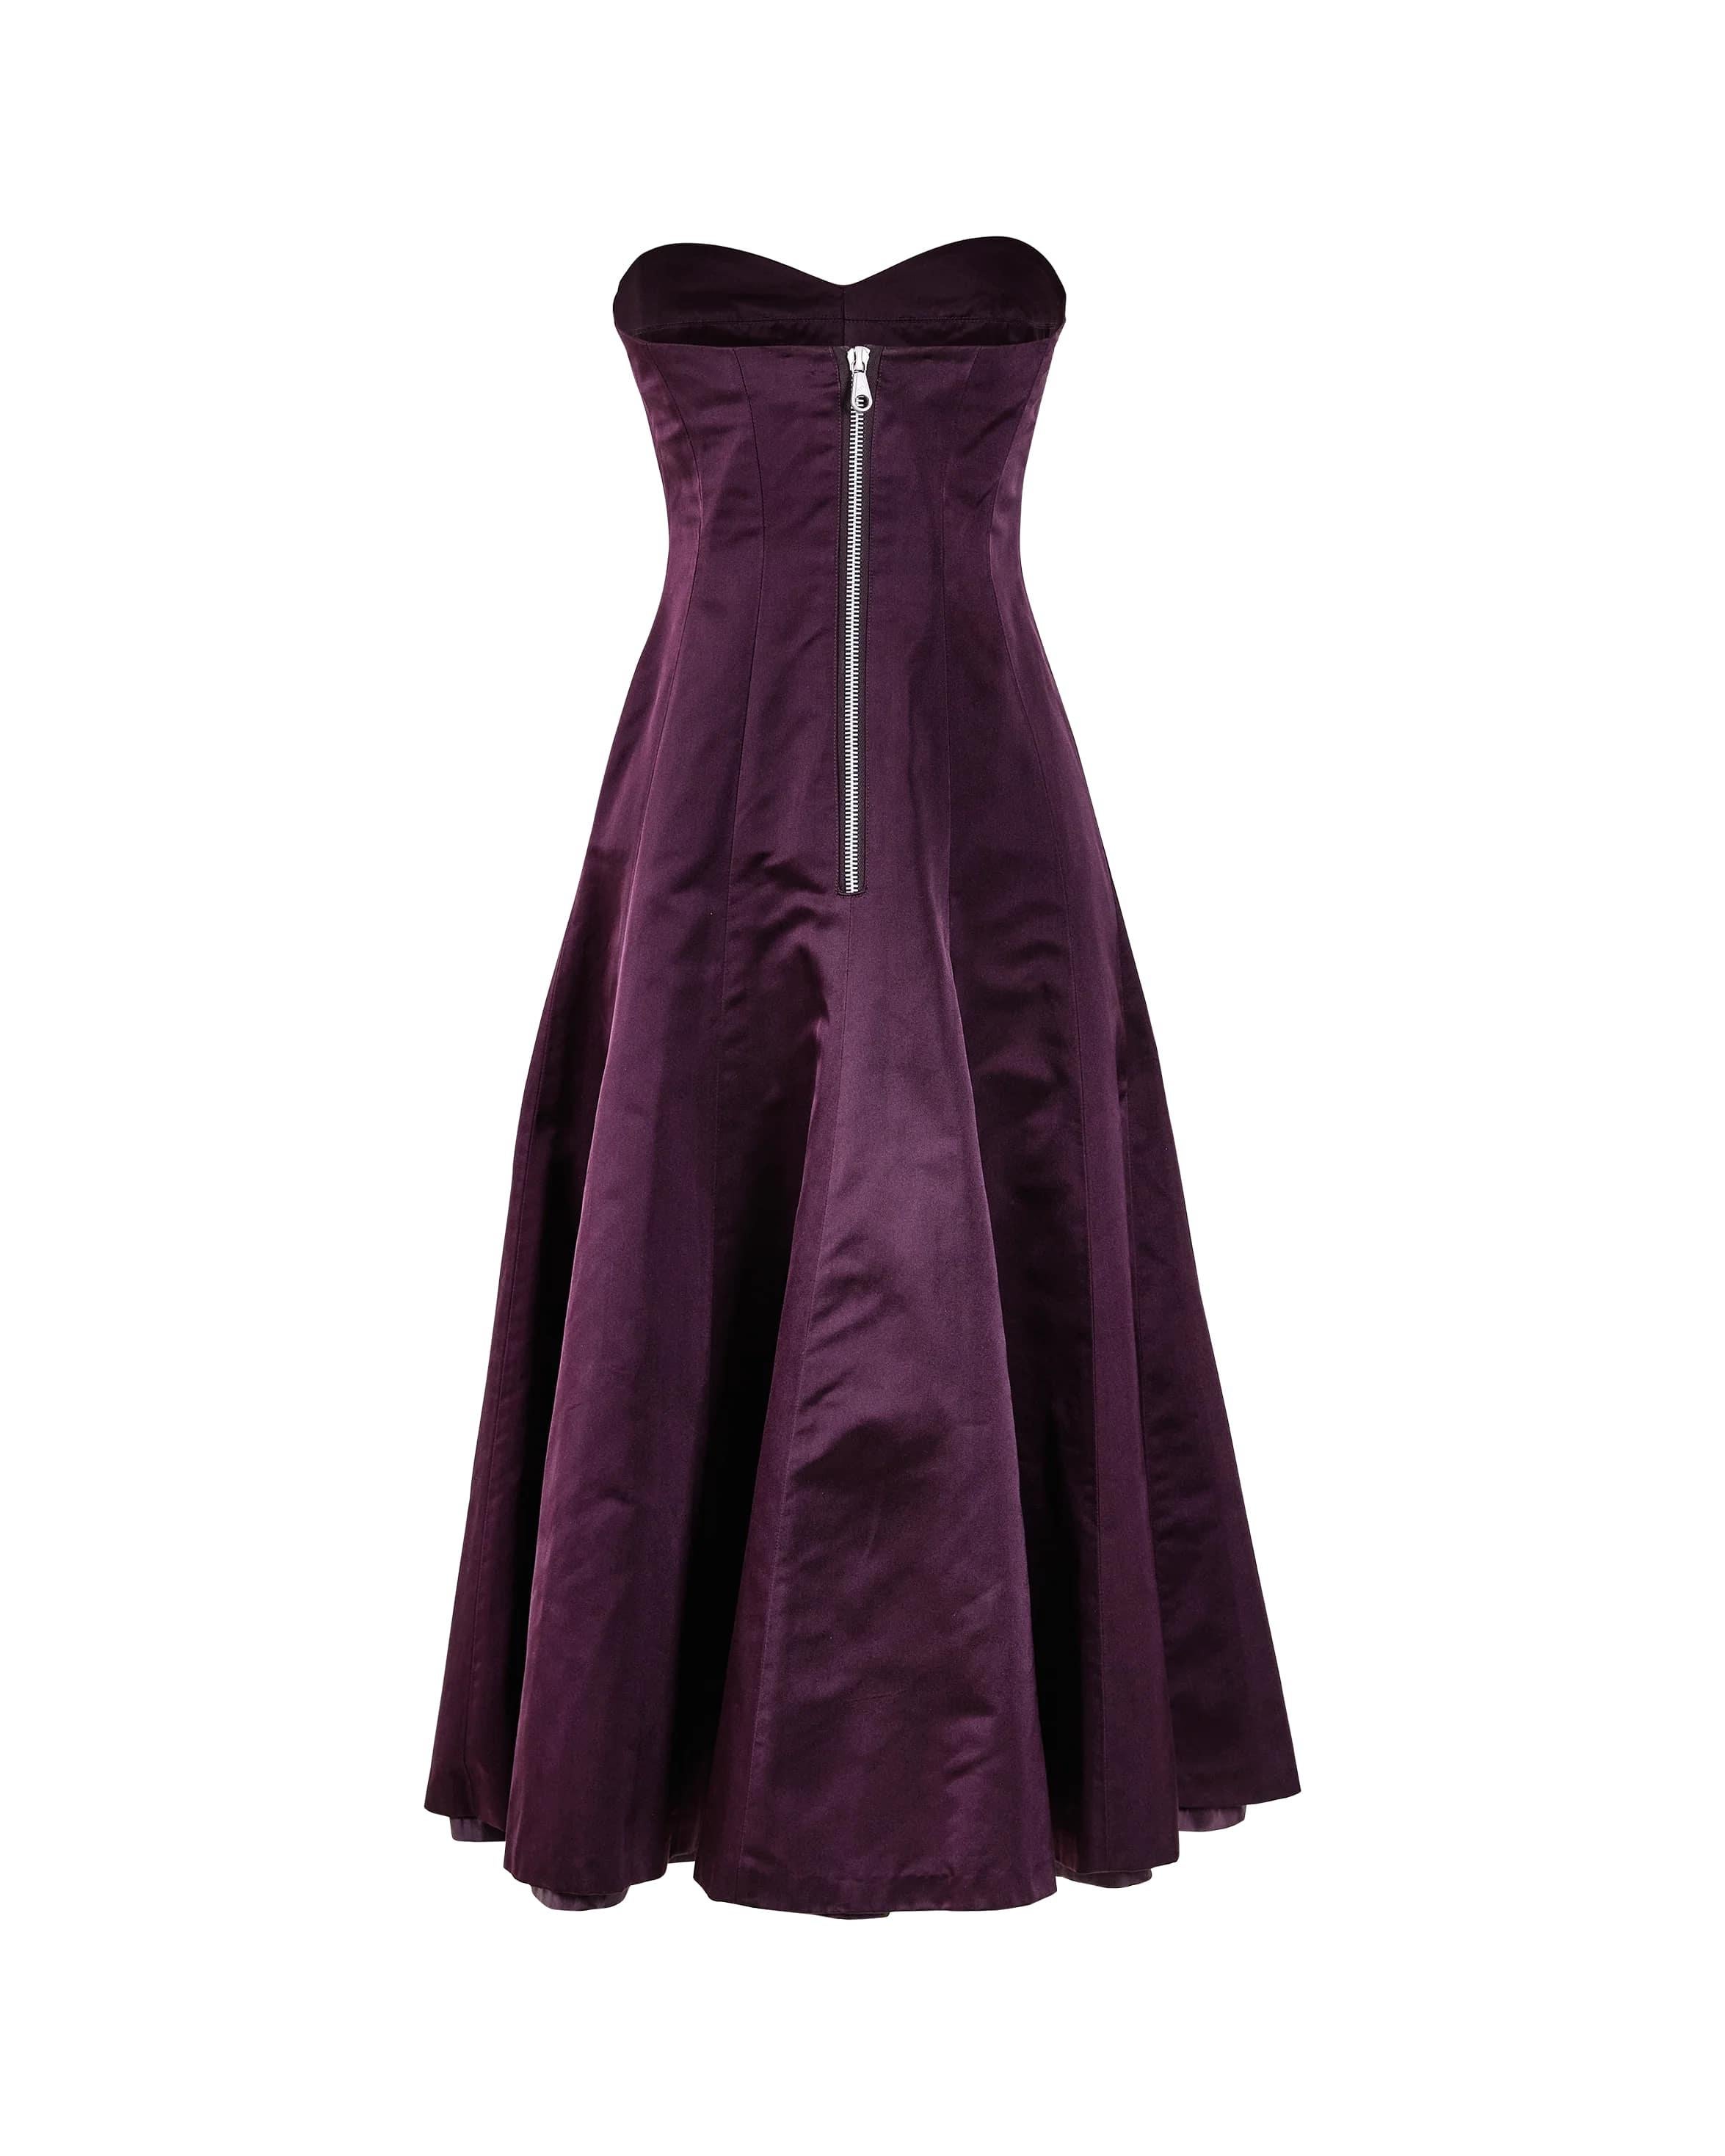 A/W 2001 Chloé by Stella McCartney Purple Strapless Silk Midi Dress In Excellent Condition In North Hollywood, CA